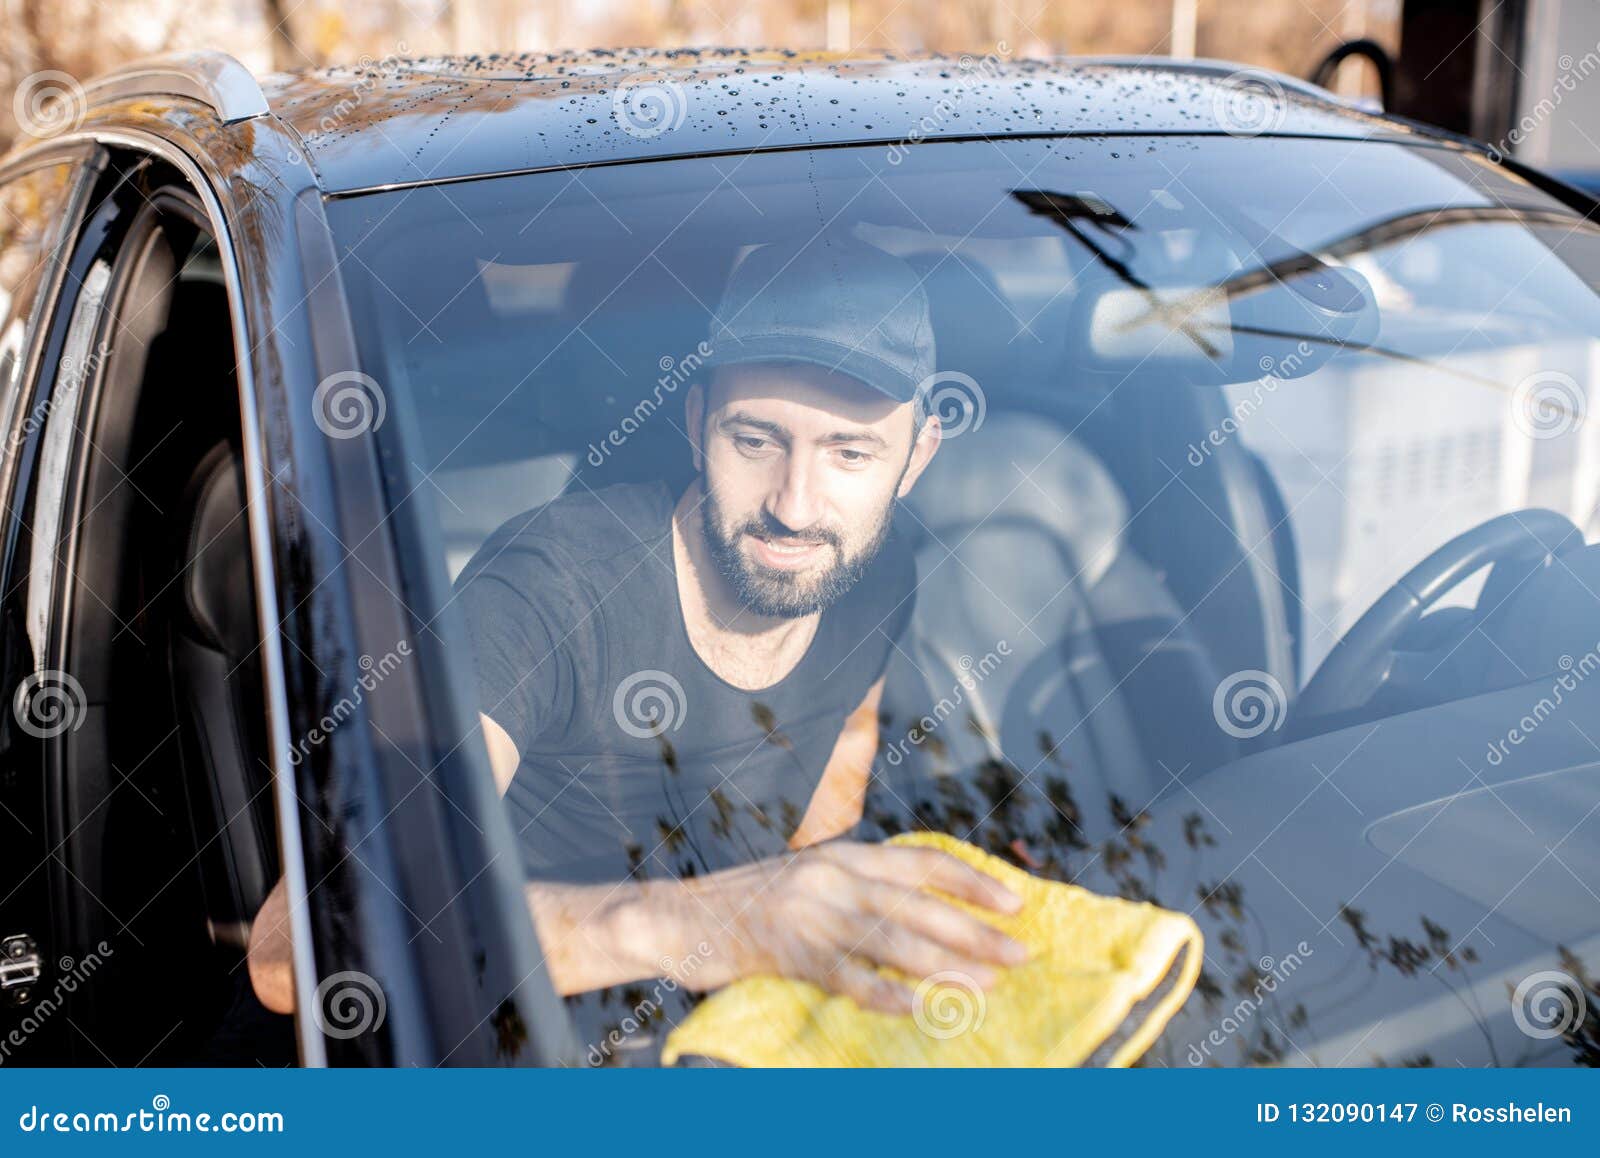 Washer Cleaning Car Interior Stock Image Image Of